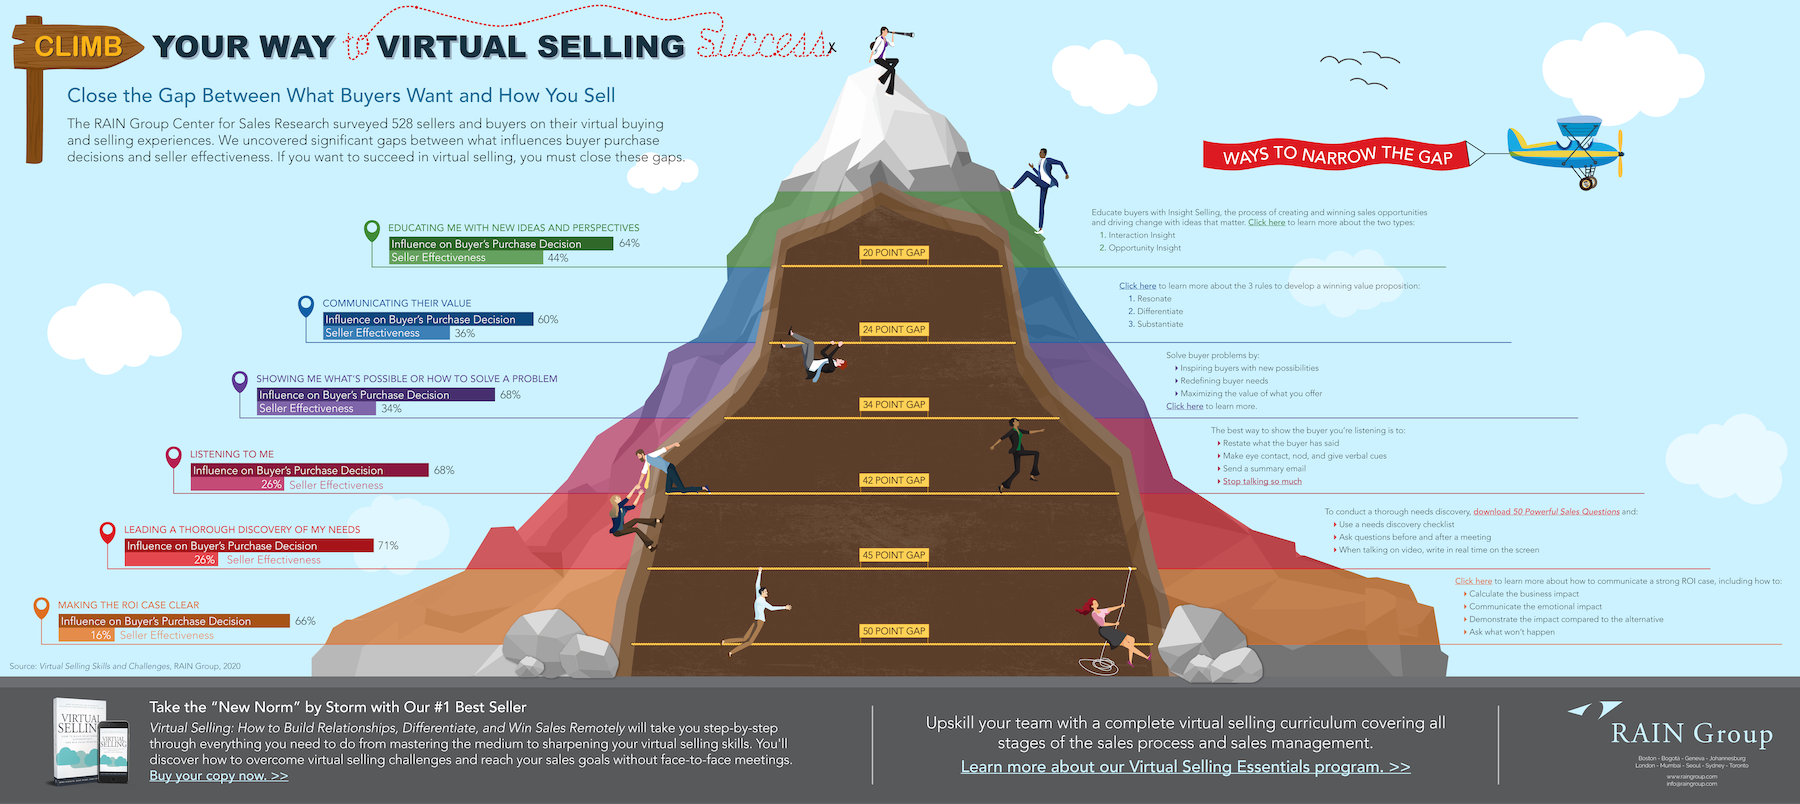 Climb Your Way to Virtual Selling Success Infographic